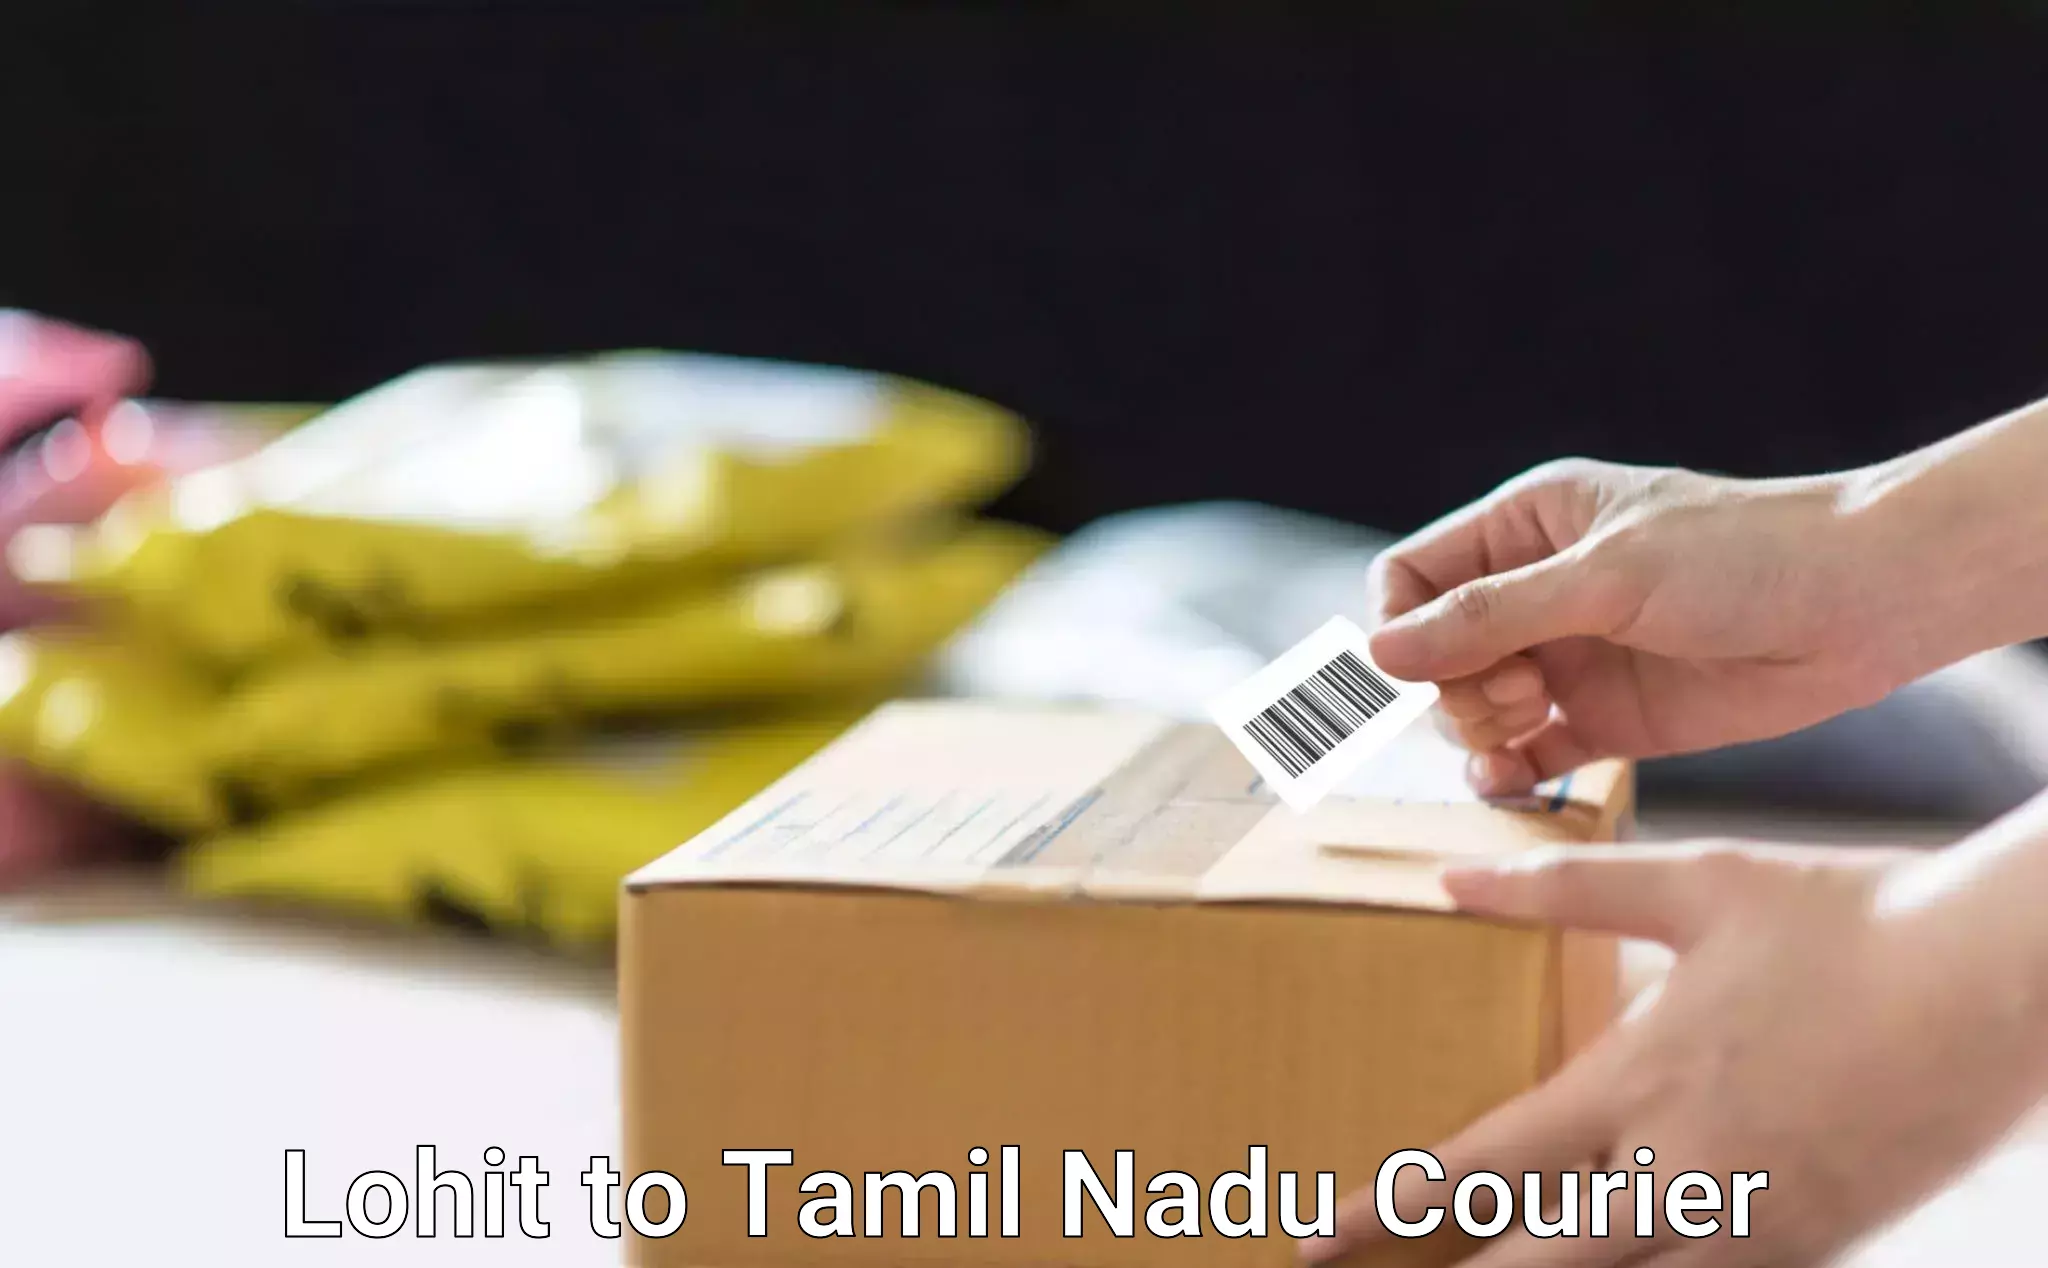 Customized shipping options Lohit to Tamil Nadu